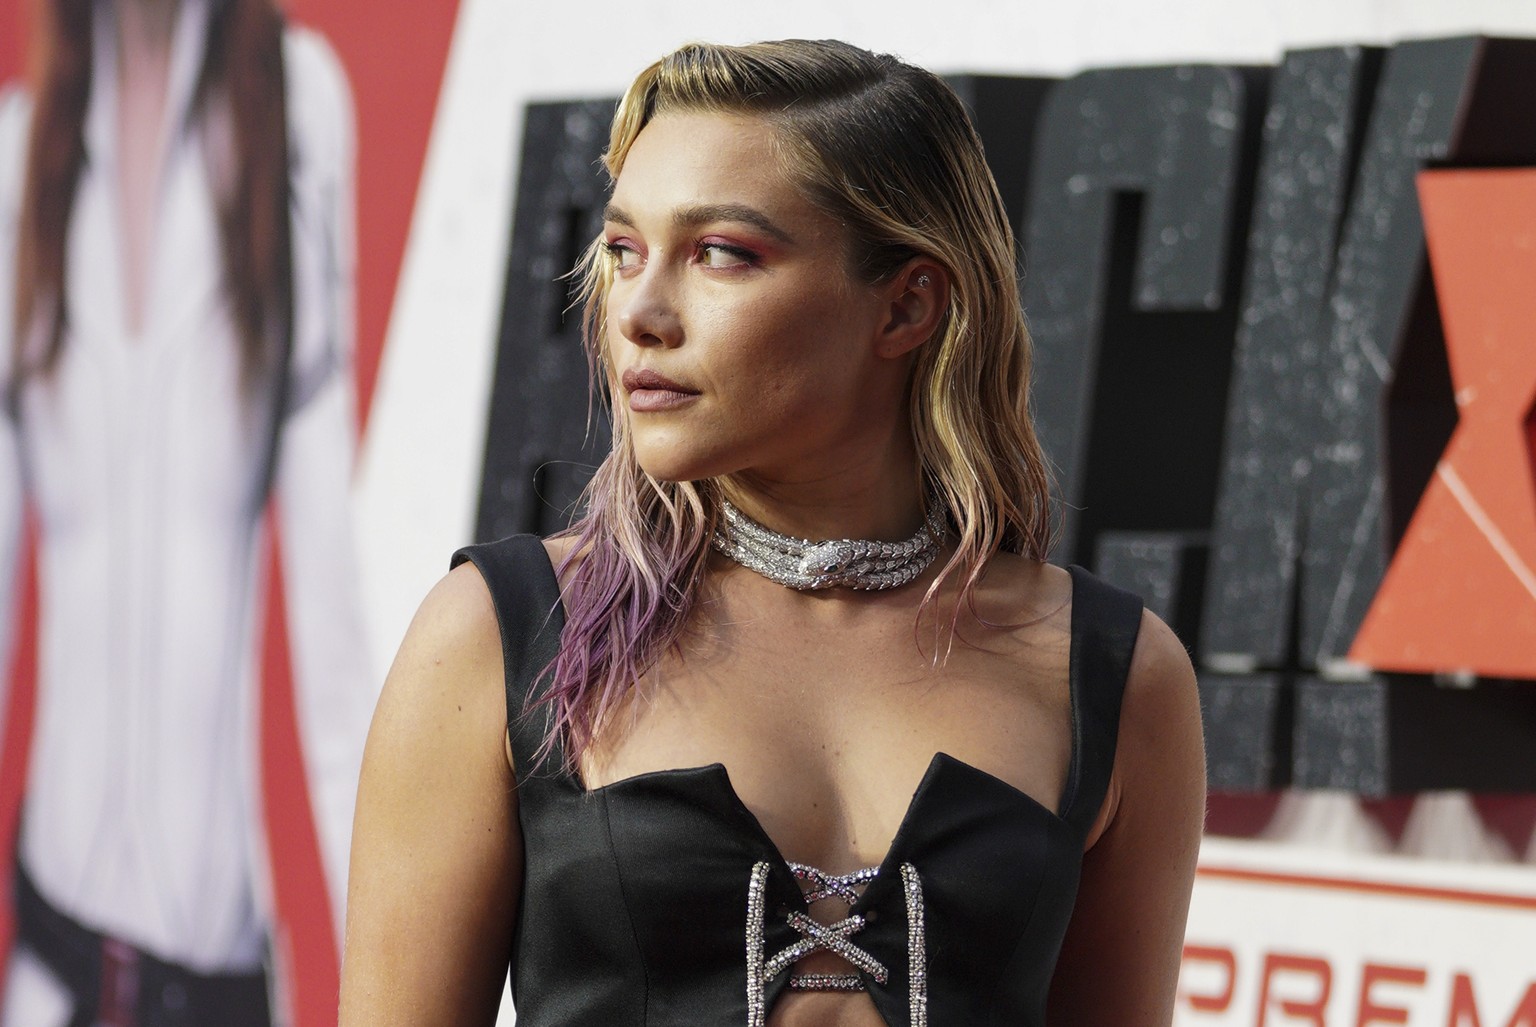 Florence Pugh poses for photographers upon arrival at a fan event for the film Black Widow in London, Tuesday, June 29, 2021. (AP Photo/Scott Garfitt)
Florence Pugh